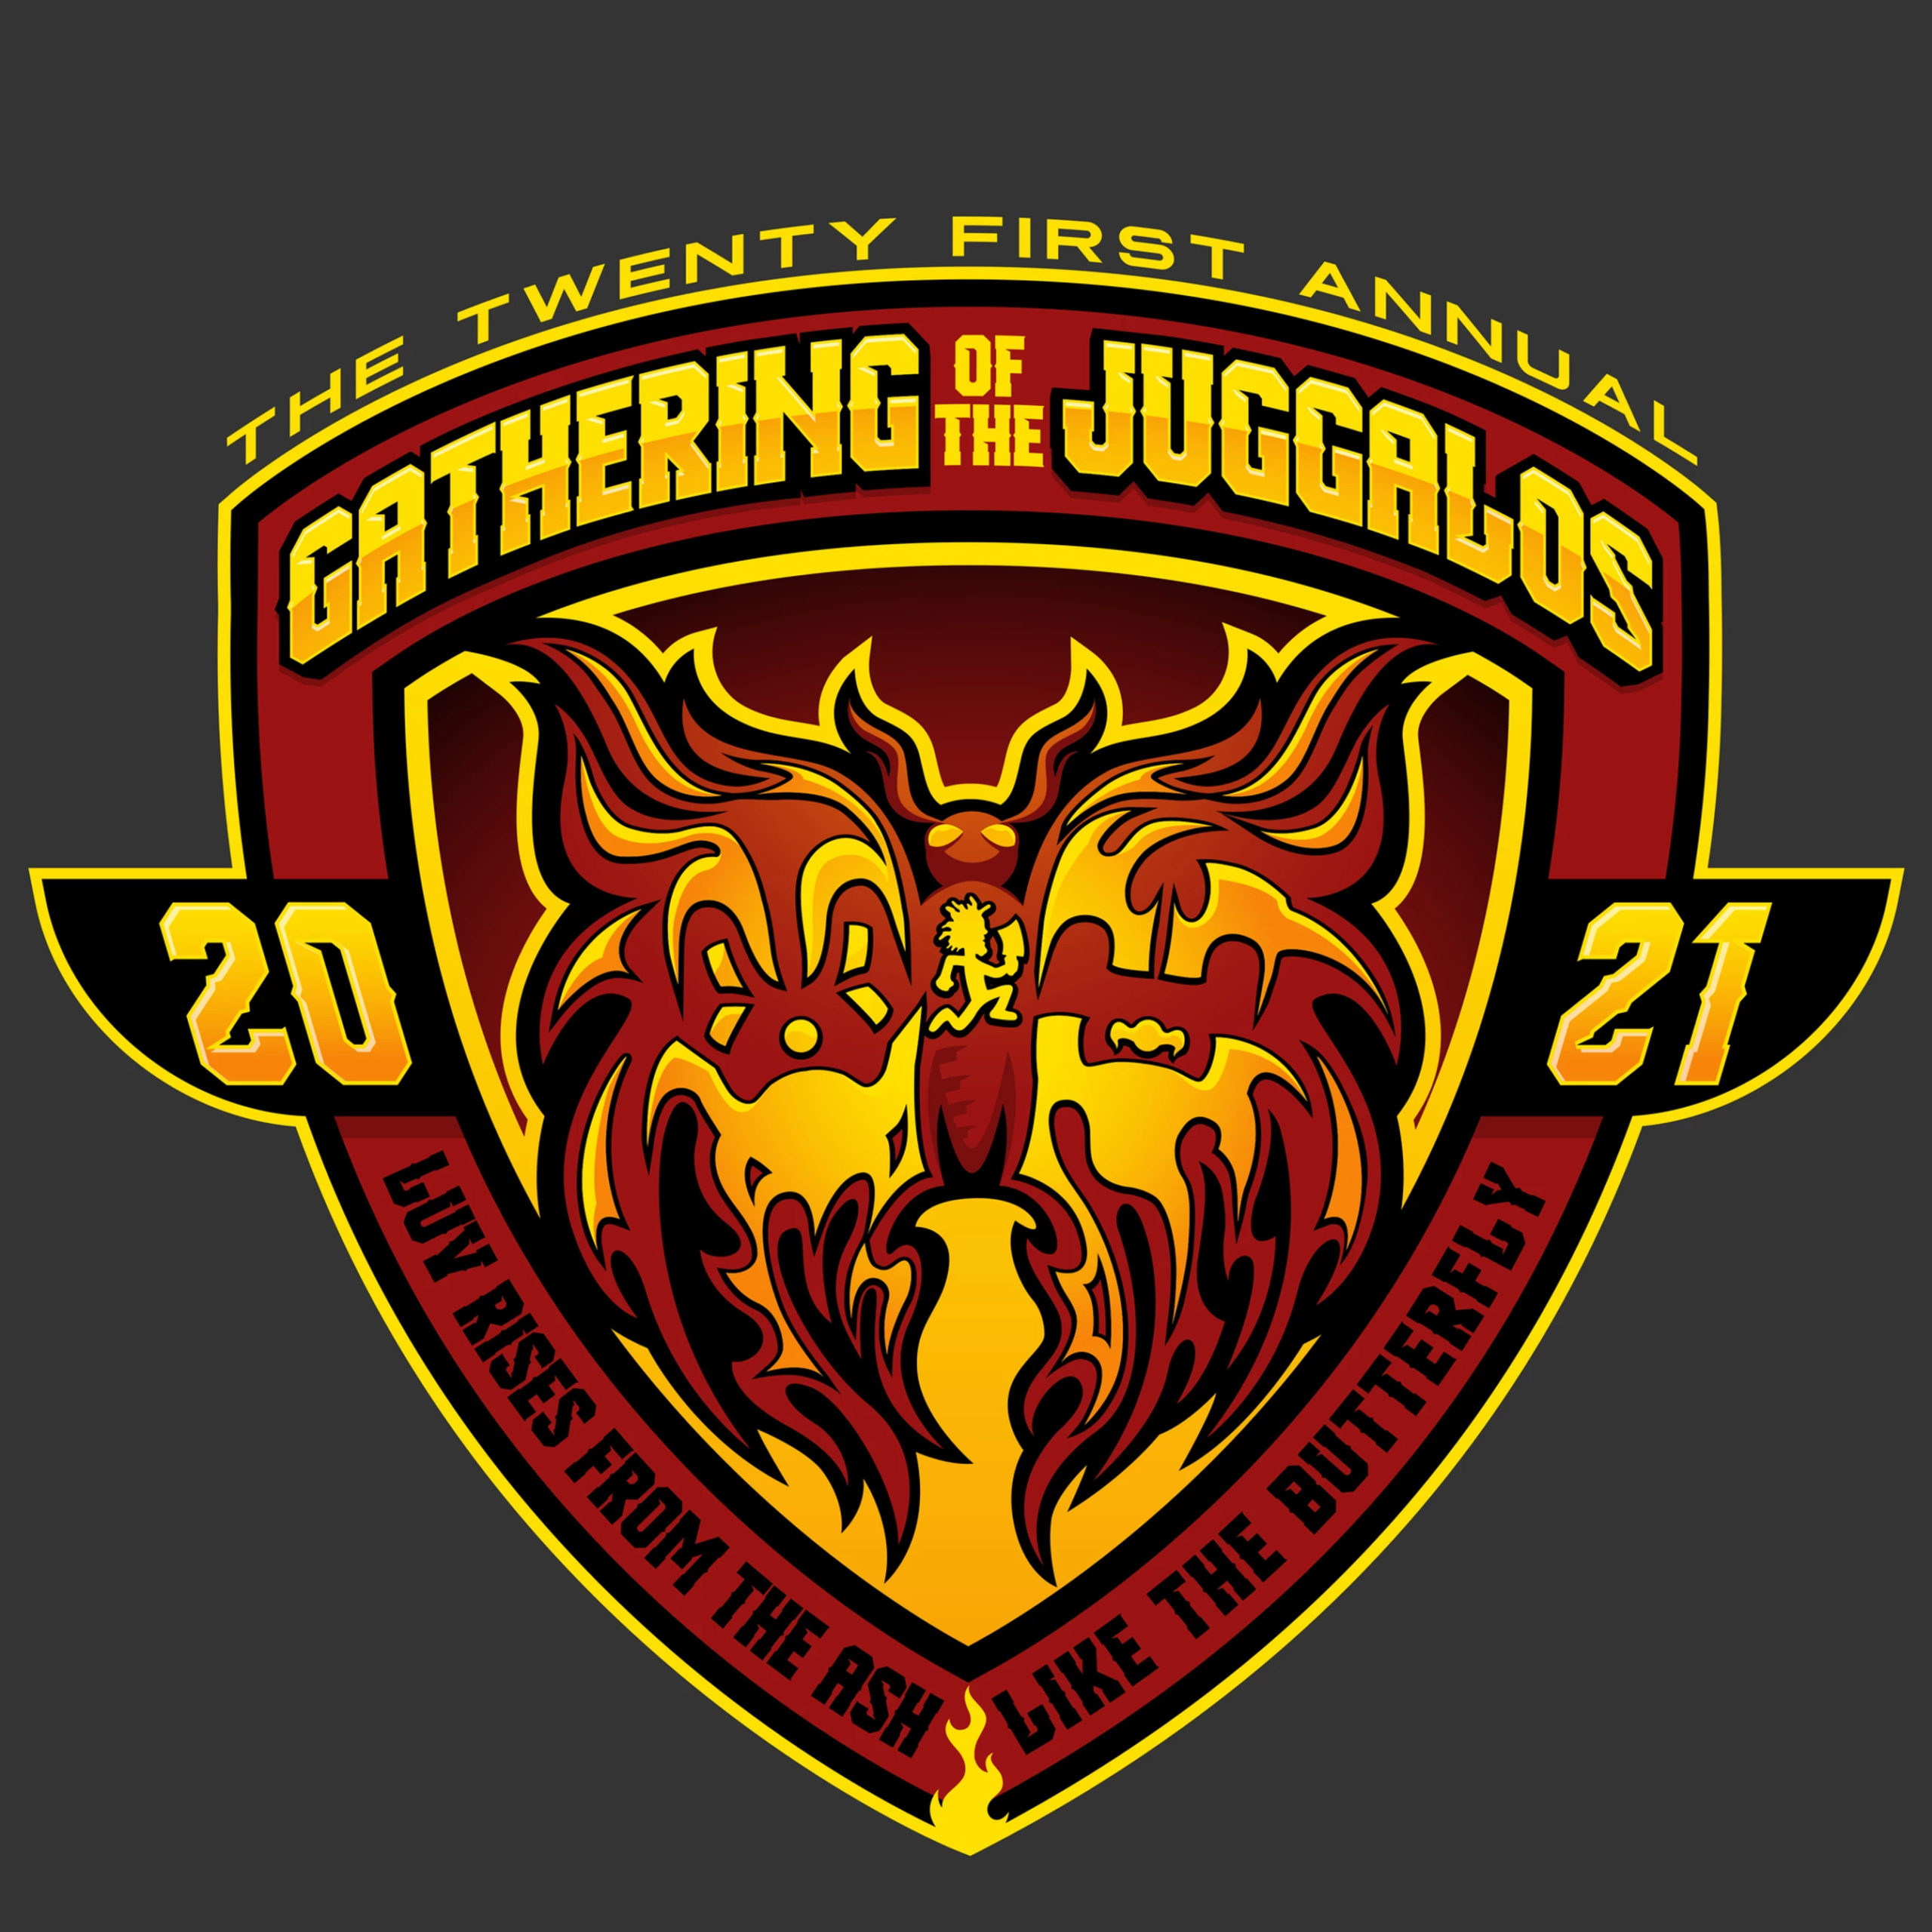 21st Annual Gathering Of The Juggalos